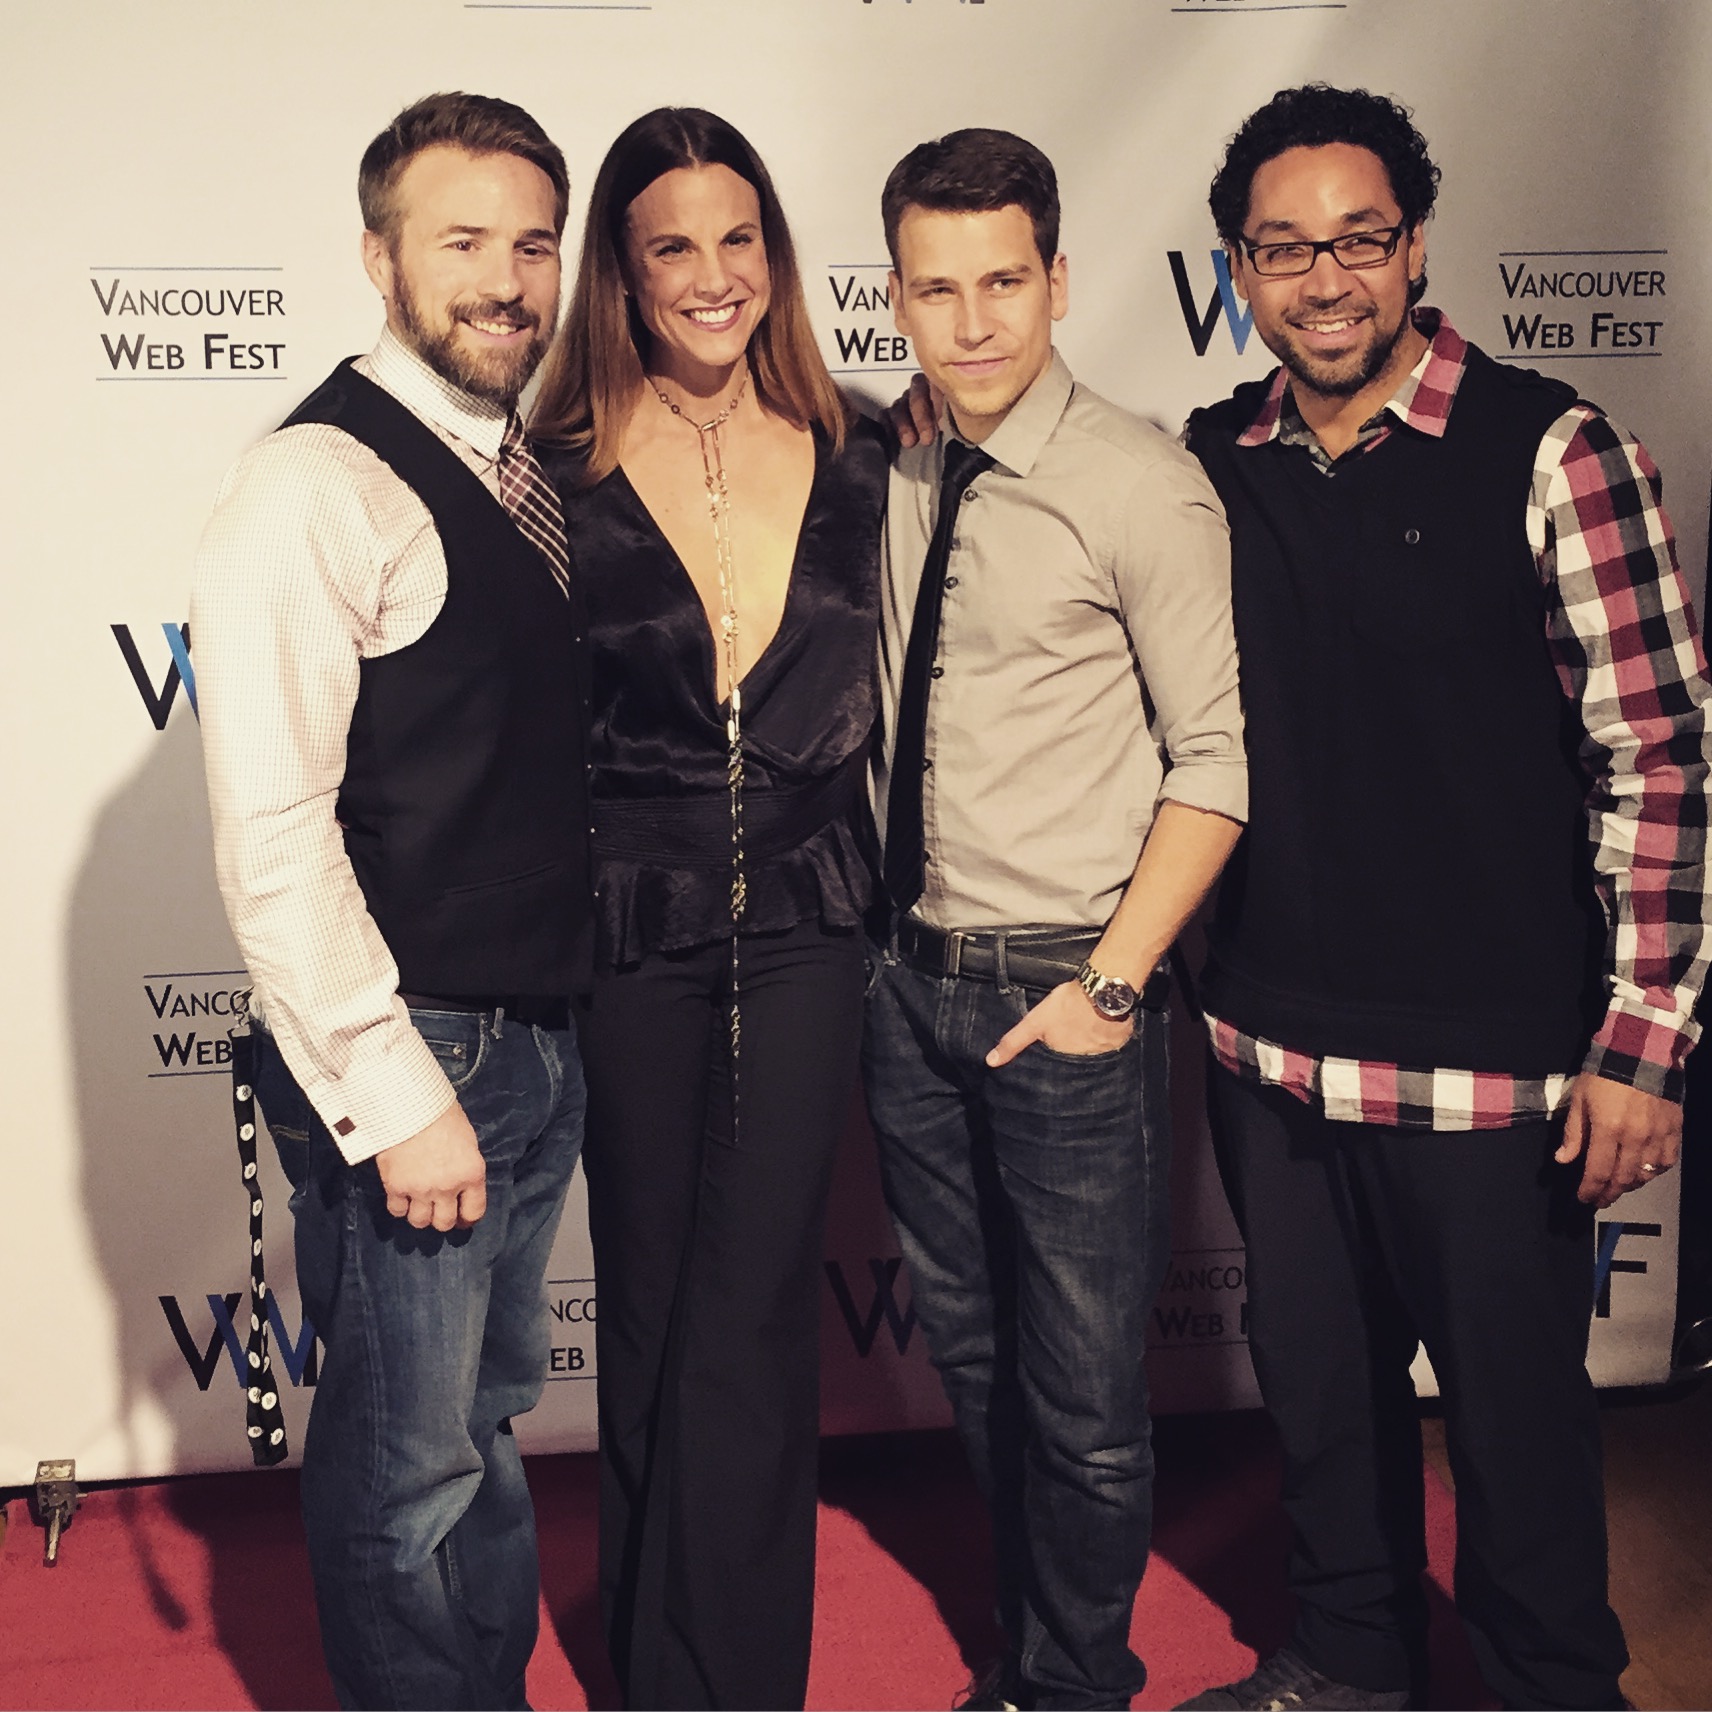 At the Vancouver Web Fest 2015 for Single & Dating In Vancouver Best Comedy and Best Female Actress Nominations.